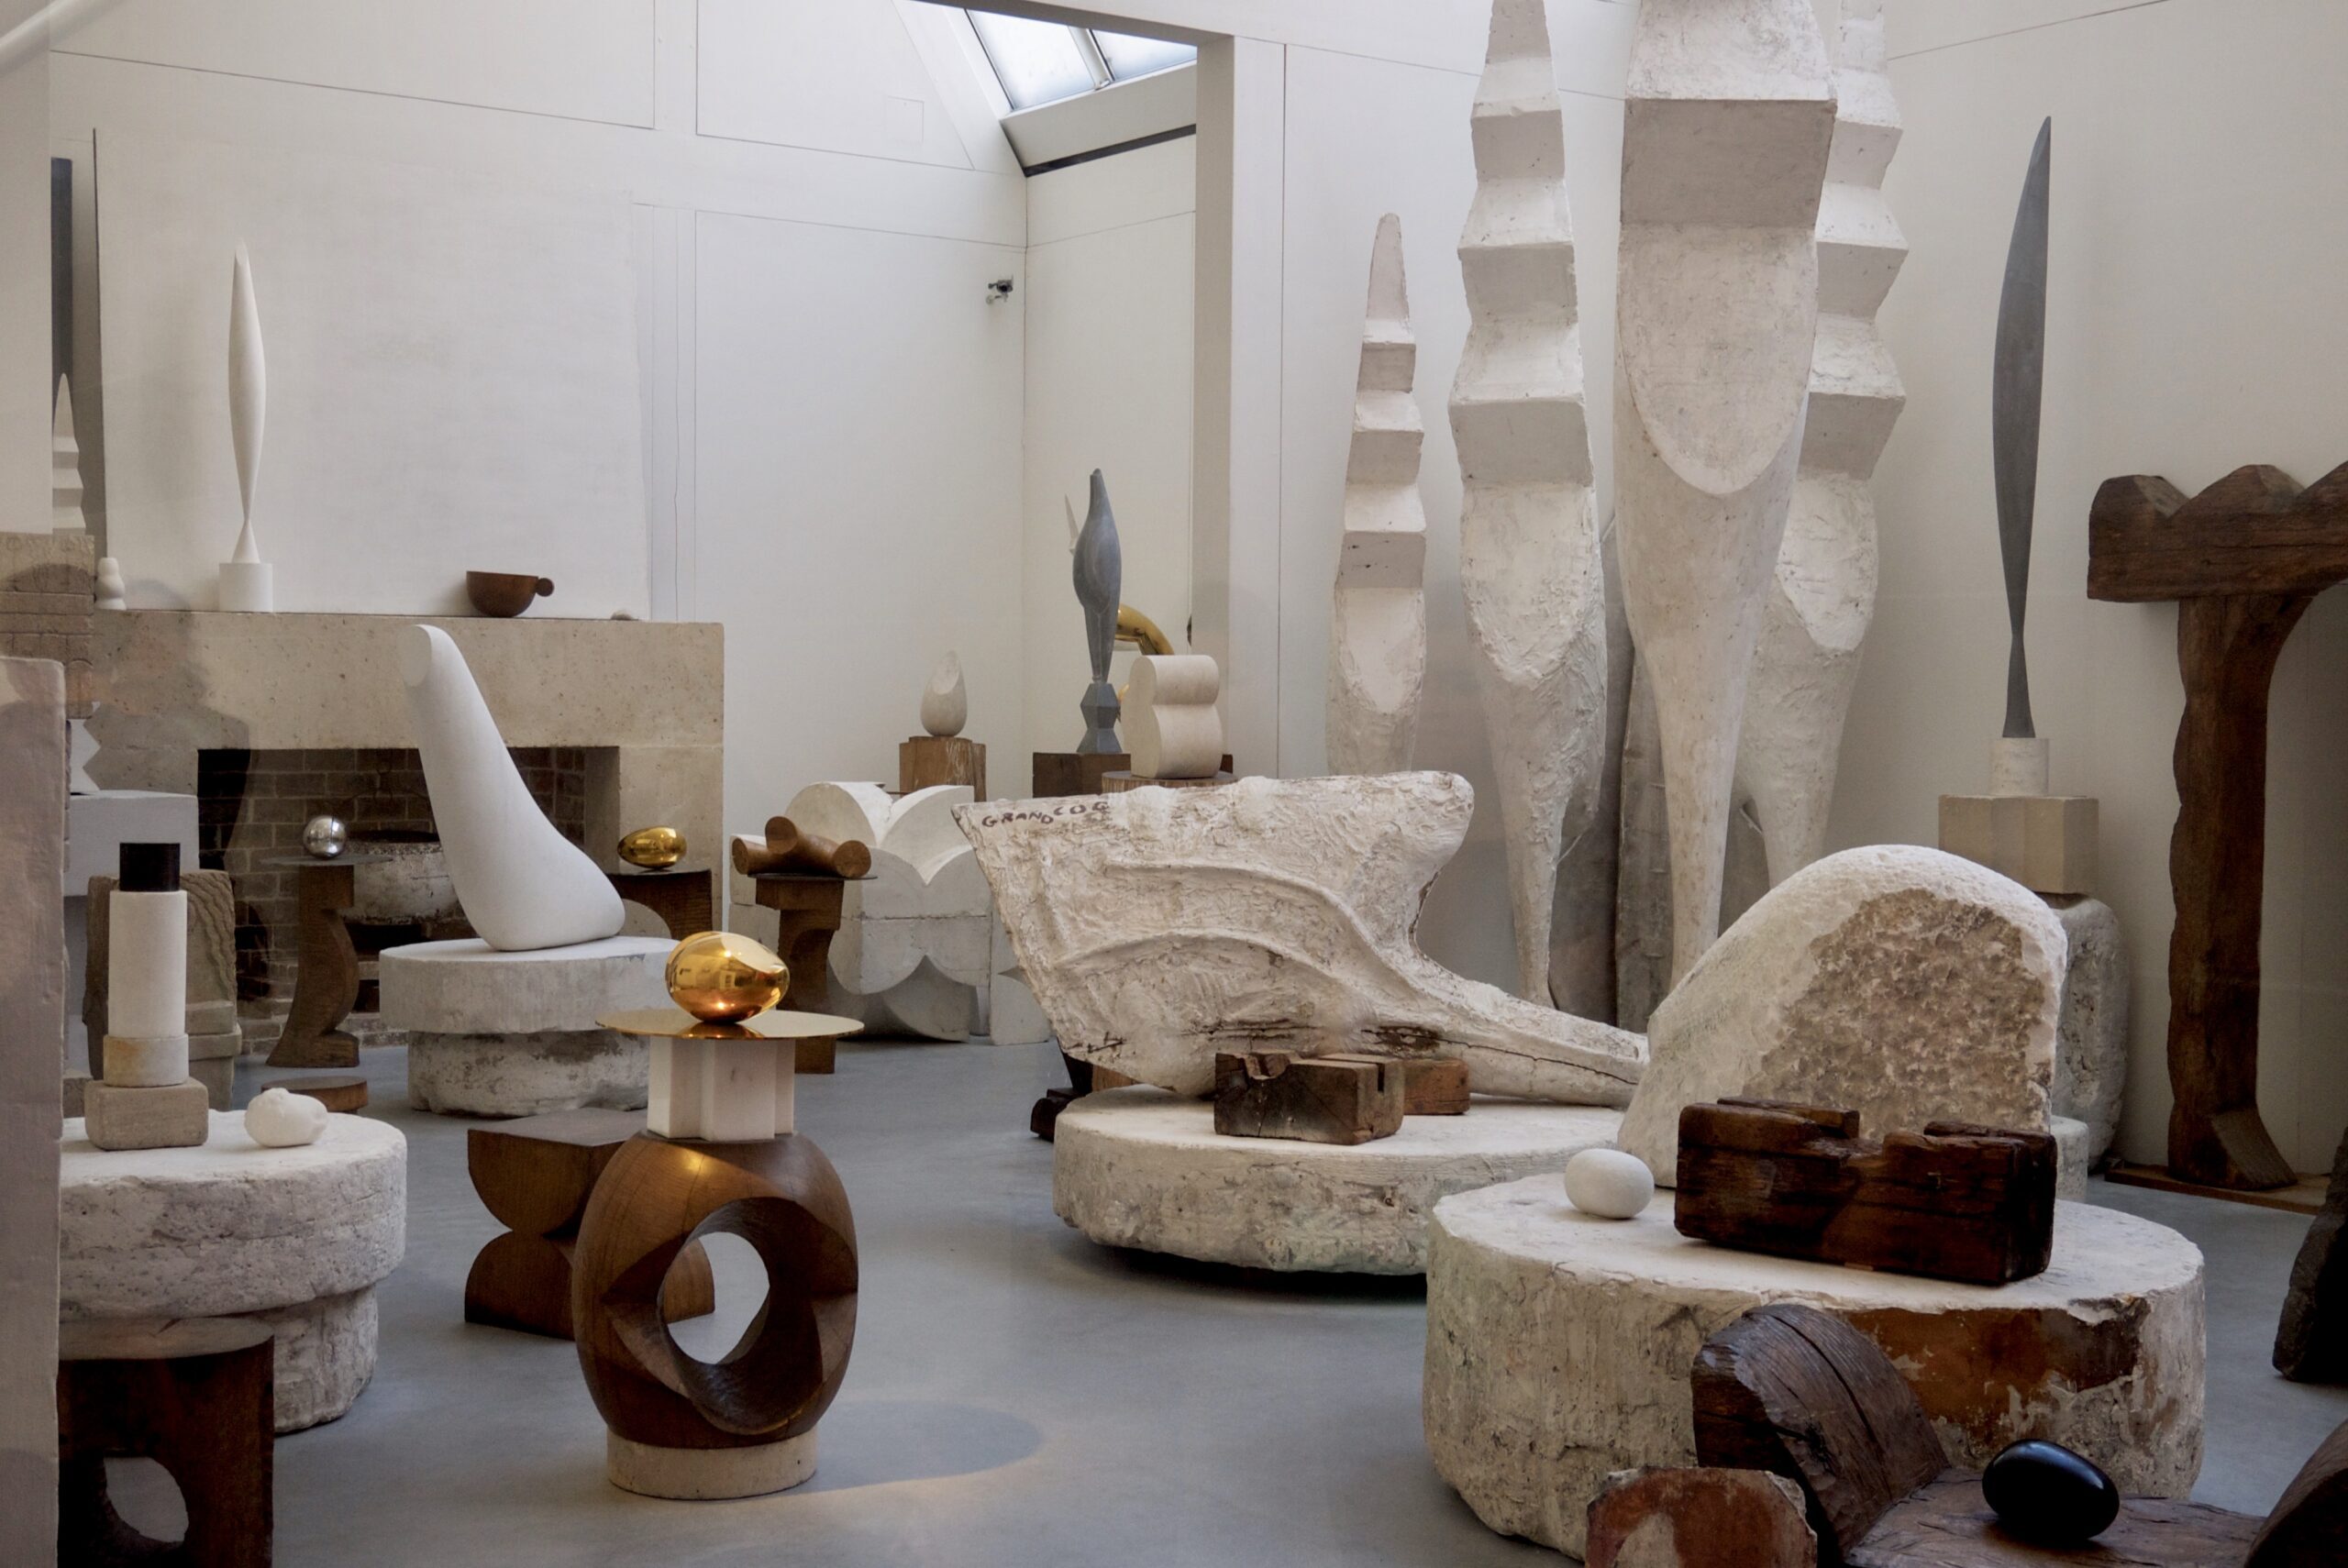 Room showcasing different sized stone sculptures at the Brancusi workshop